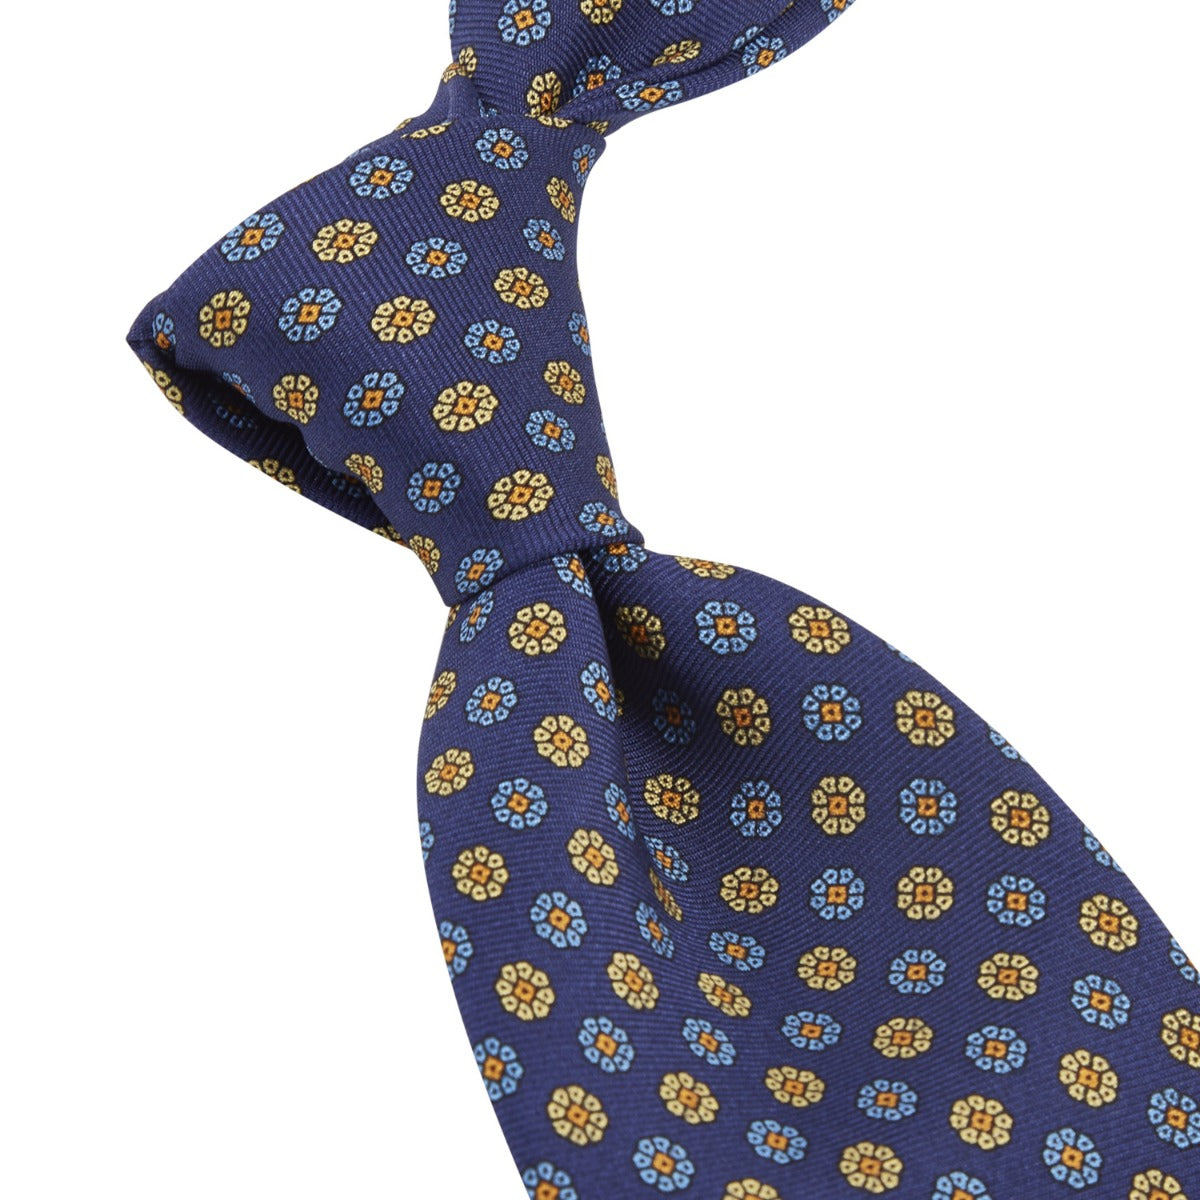 A Sovereign Grade Royal/Blue/Cream Maccesfield Corn Floral Motif Tie with yellow and blue flowers, crafted with the highest quality, from KirbyAllison.com.